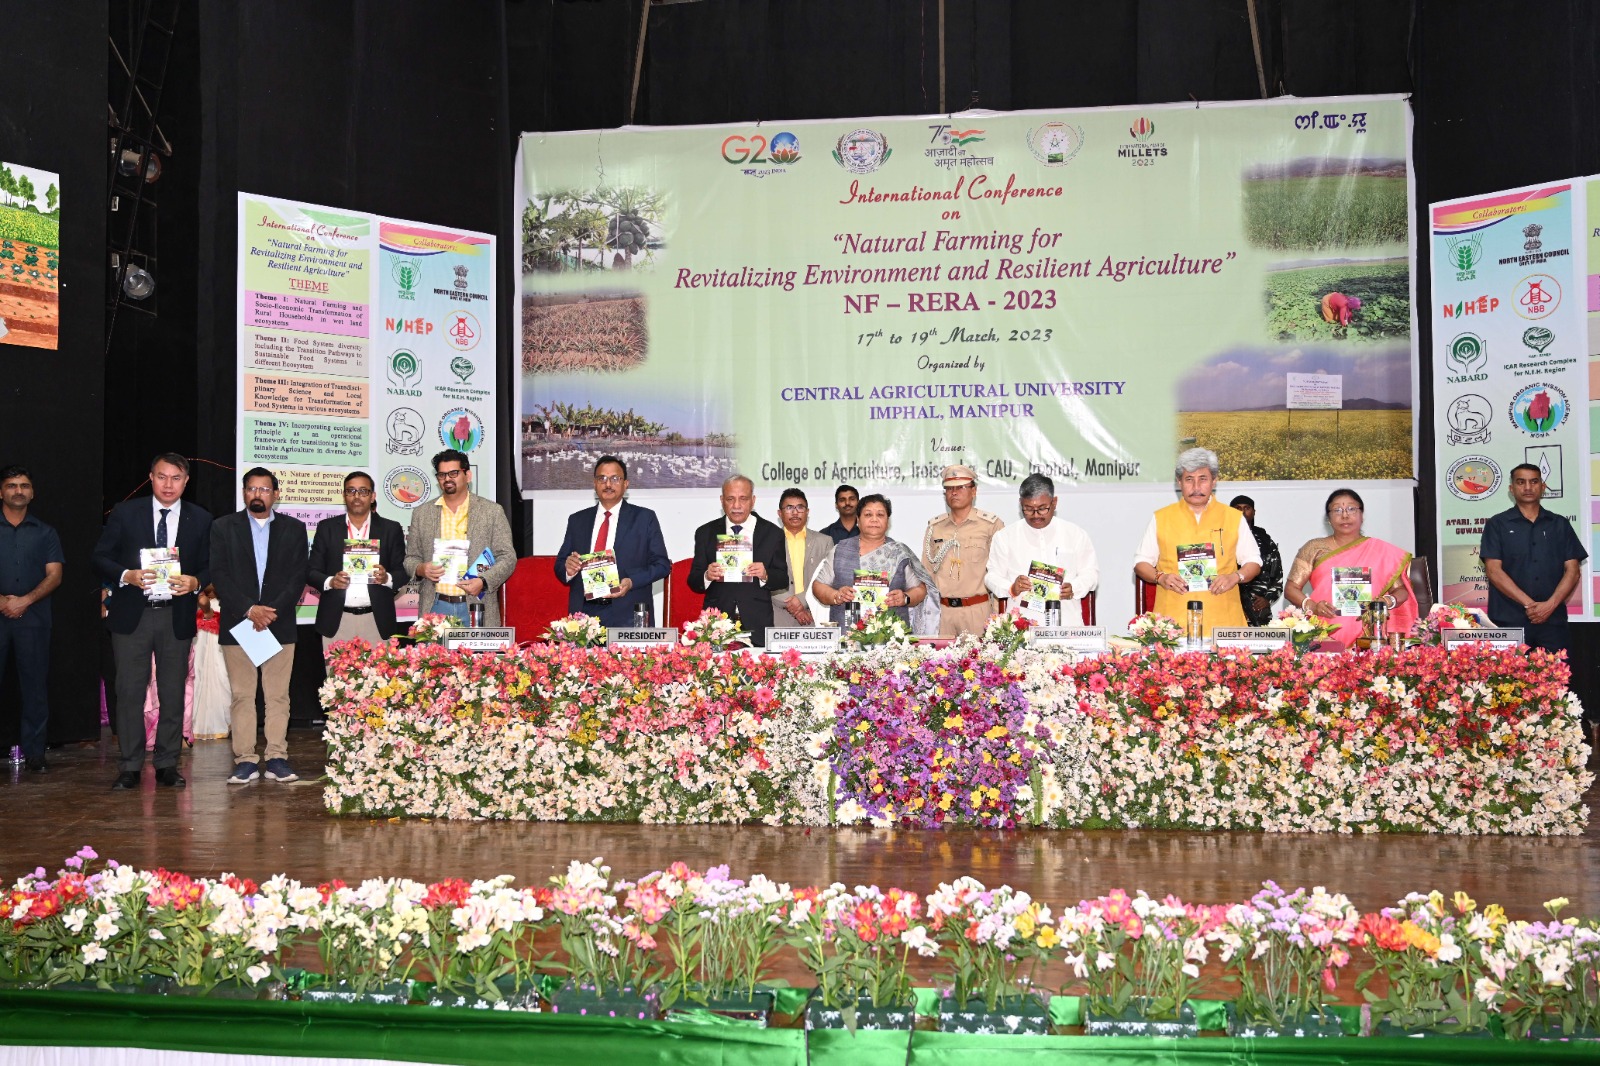 International Conference on Natural Farming for Revitalizing Environment and Resilient Agriculture-NF-RERA 2023